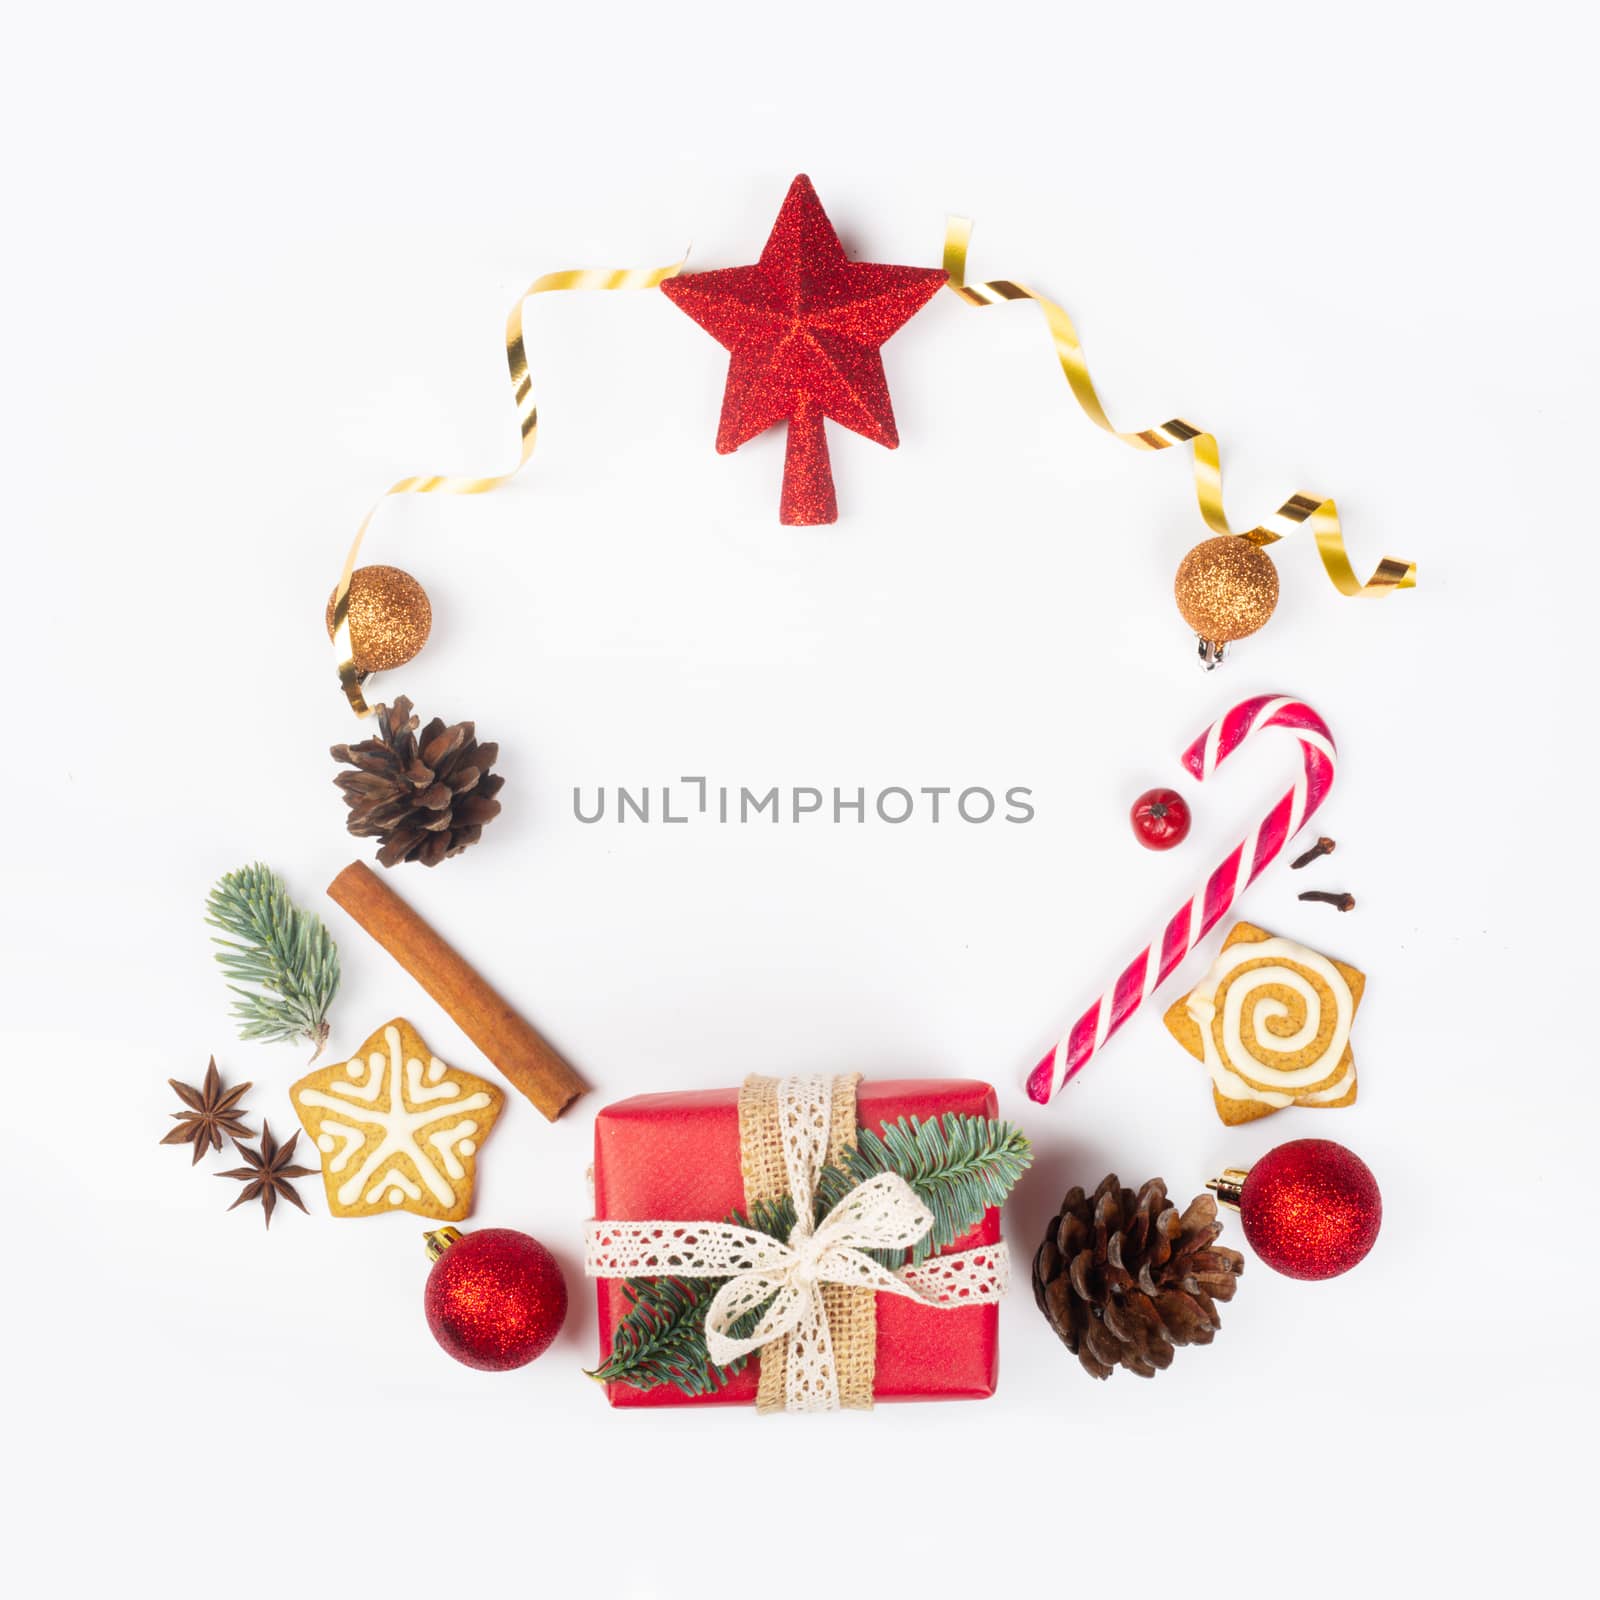 Minimalistic Christmas flat lay wreath composition of objects design top view on white background. New Year concept.